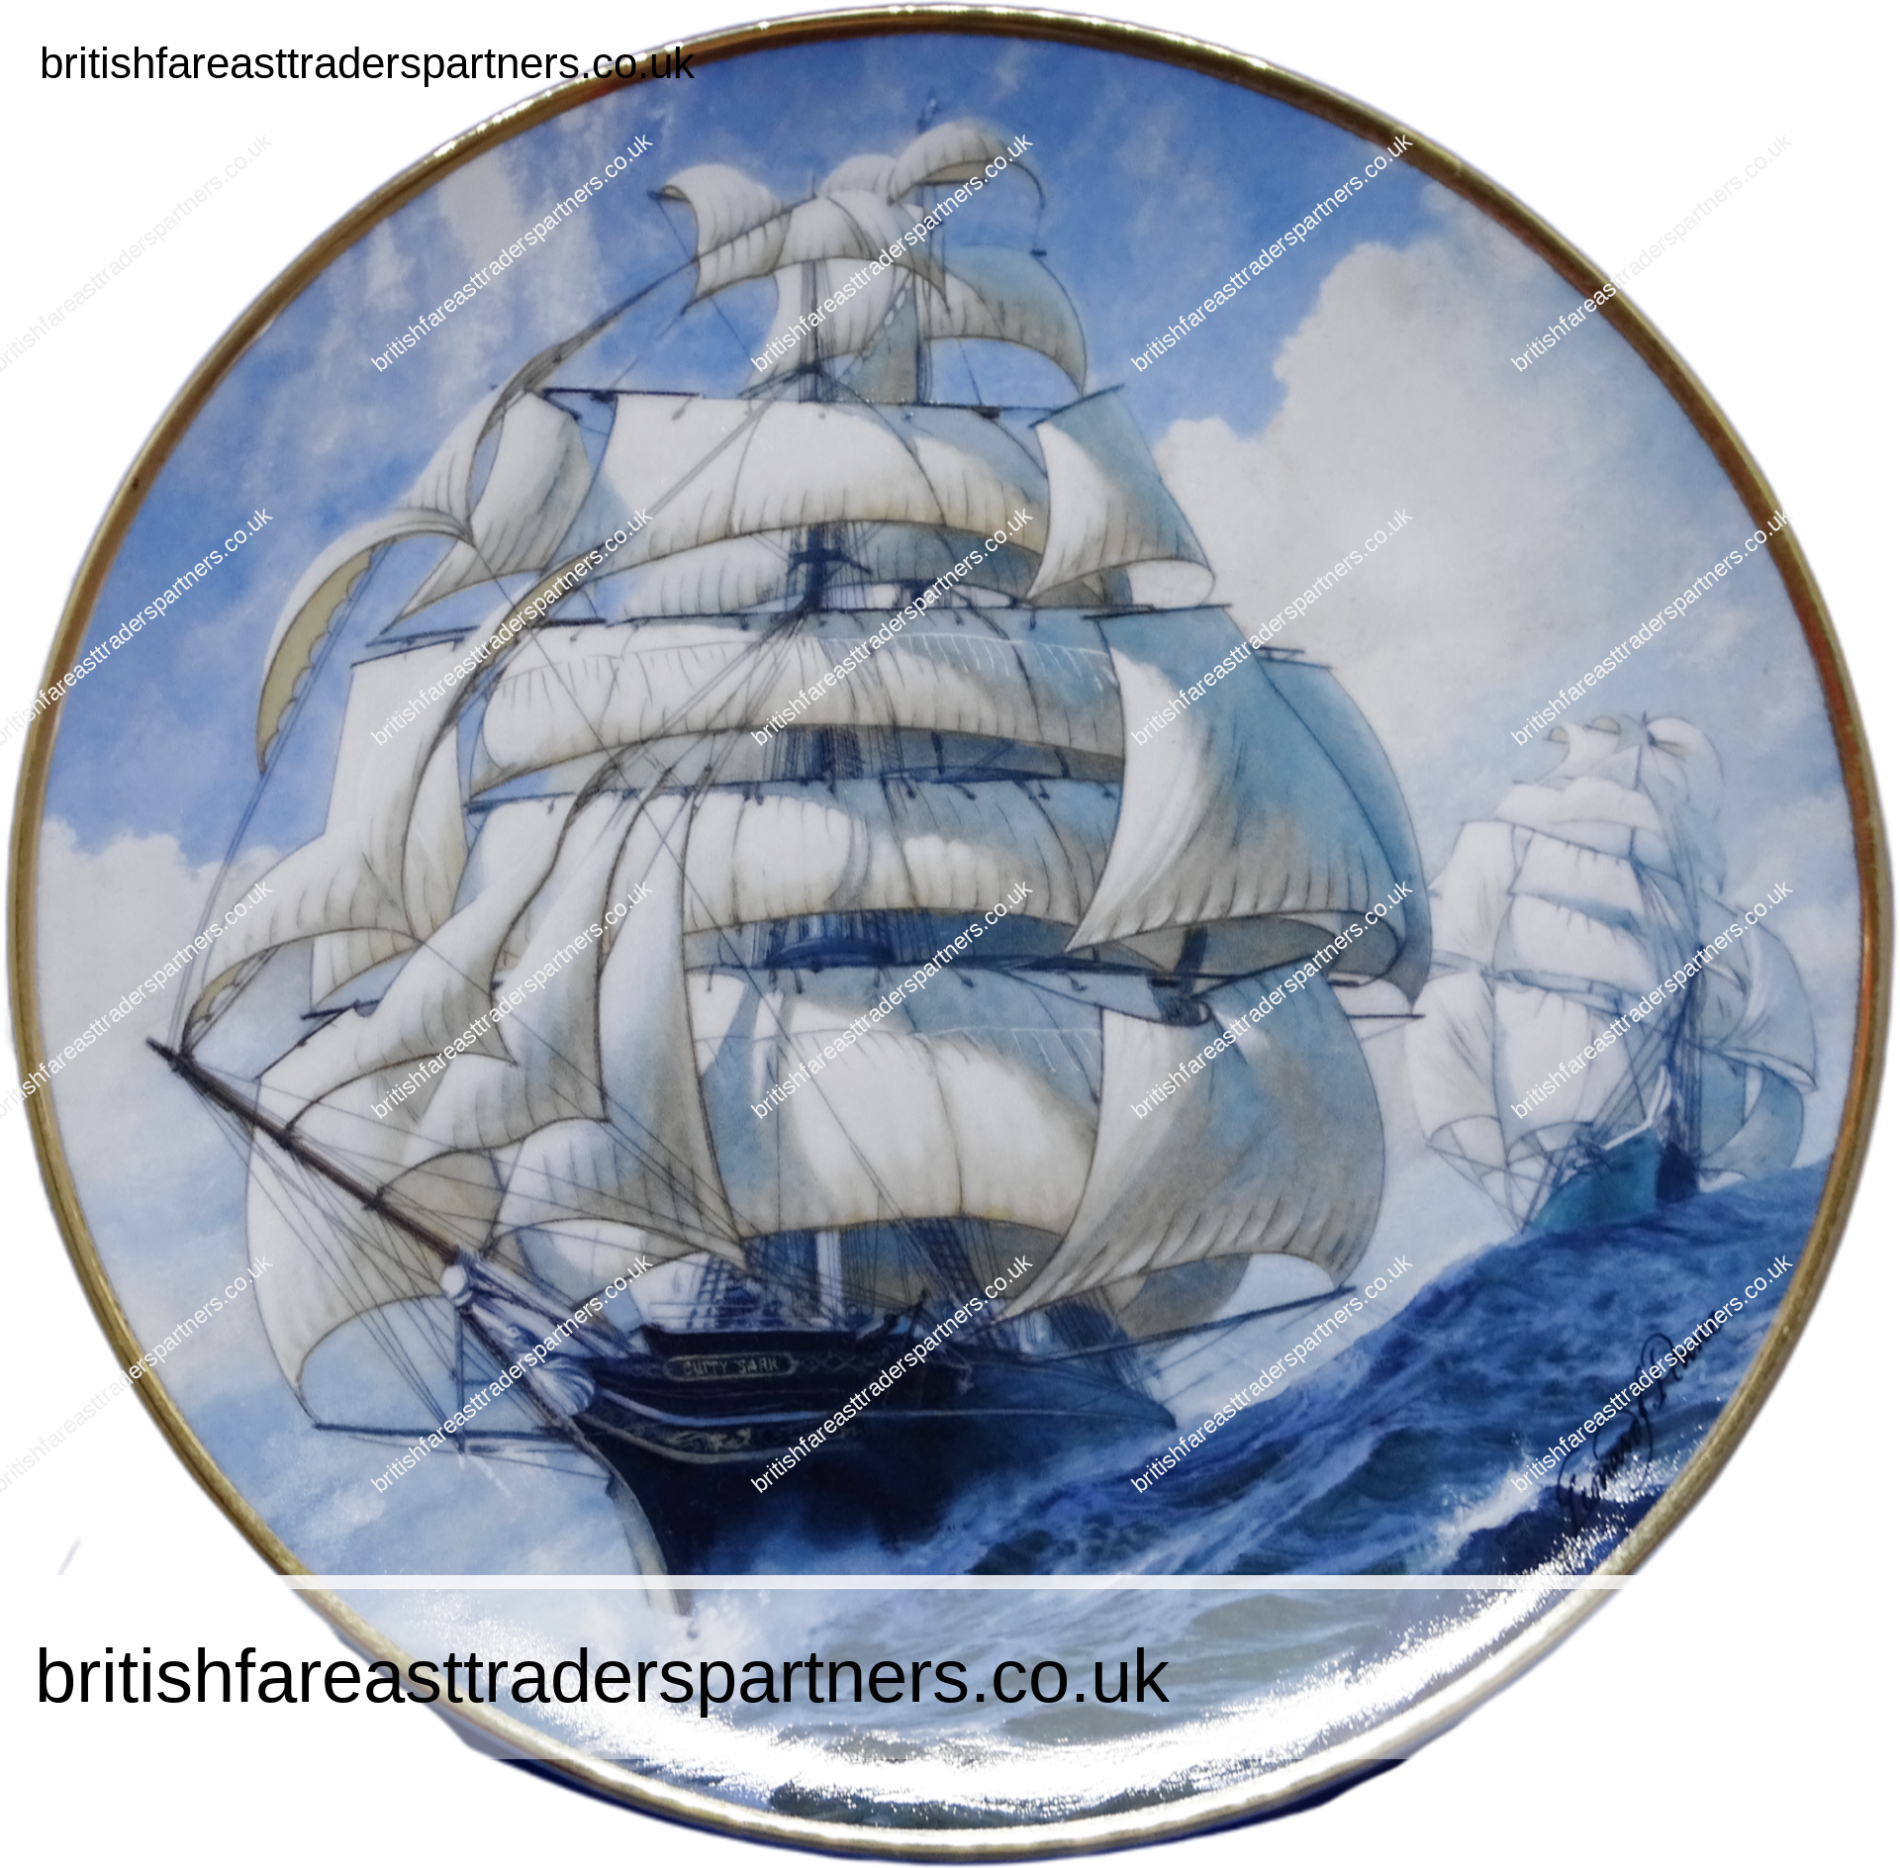 VINTAGE FRANKLIN MINT HEIRLOOM COLLECTABLE PLATE “VENTURE ON THE HIGH SEAS” BY LEONARD PEARCE VINTAGE | COLLECTABLES | DECORATIVE PLATES | ENGLISH / ENGLAND  | FINE PORCELAIN | TRANSPORT | SAILING | SHIPS | NAVAL / NAUTICAL / MARITIME |  LIFESTYLE | HERITAGE | CULTURE